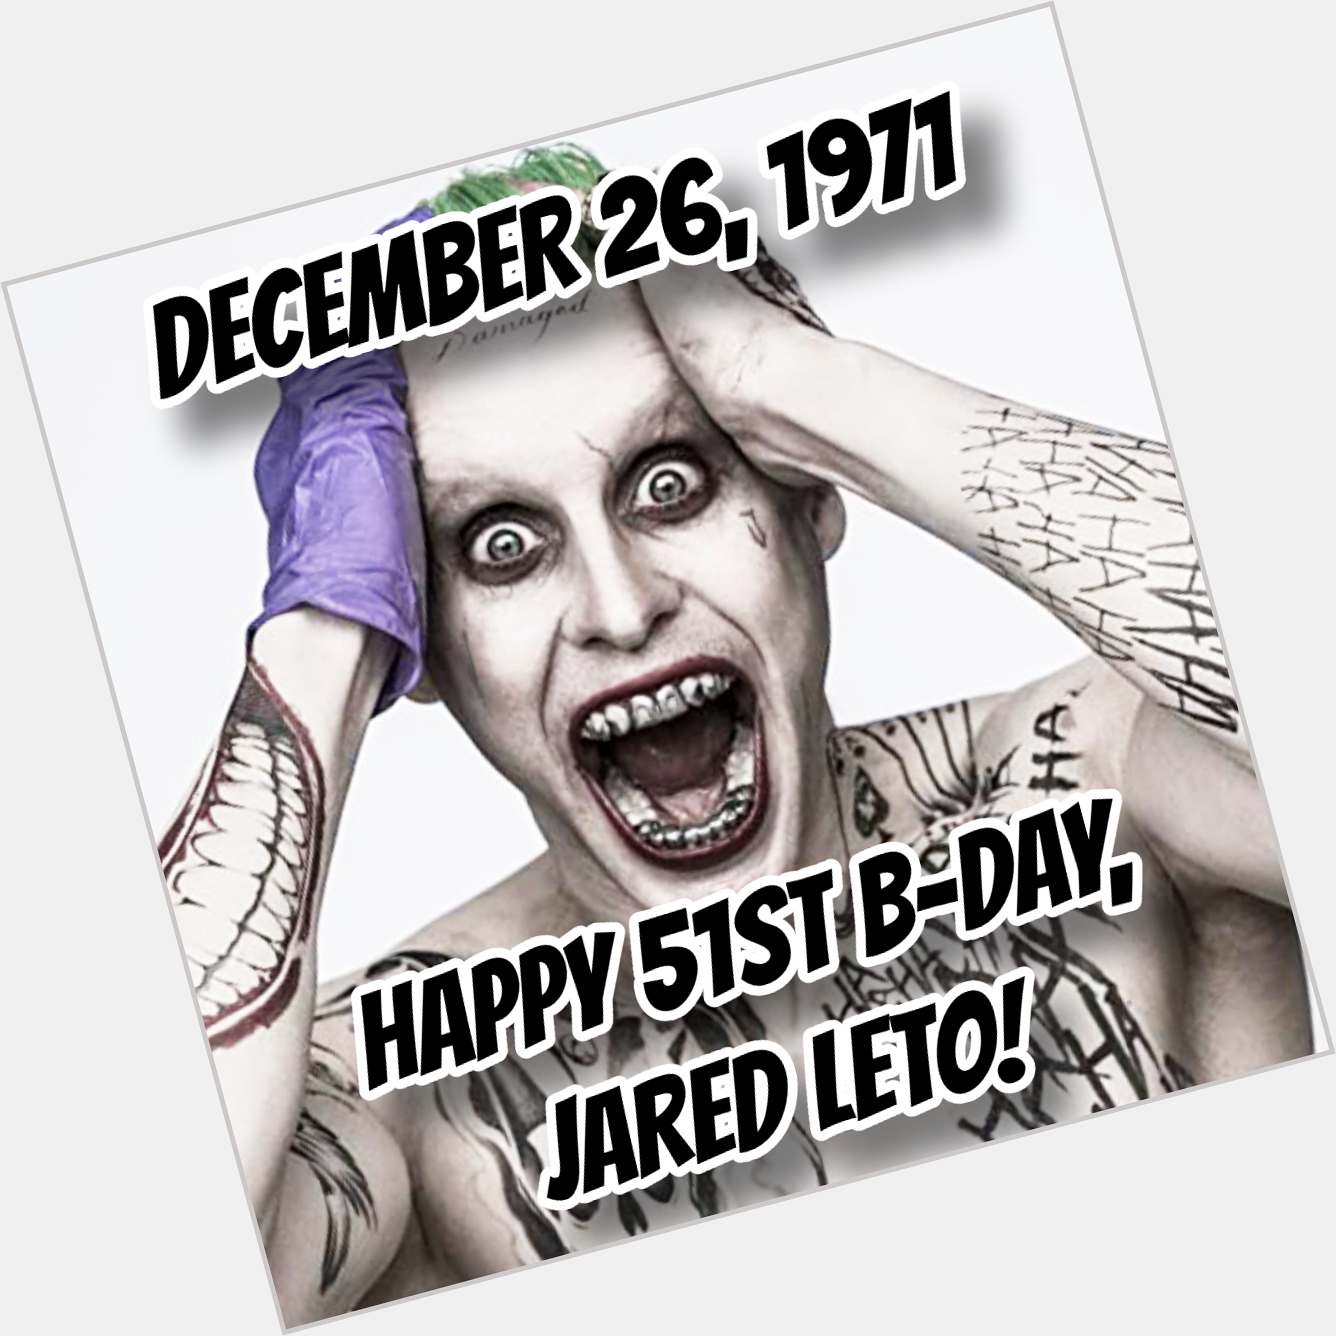 Happy 51st Jared Leto!!!

What\s YOUR  movie??!! 